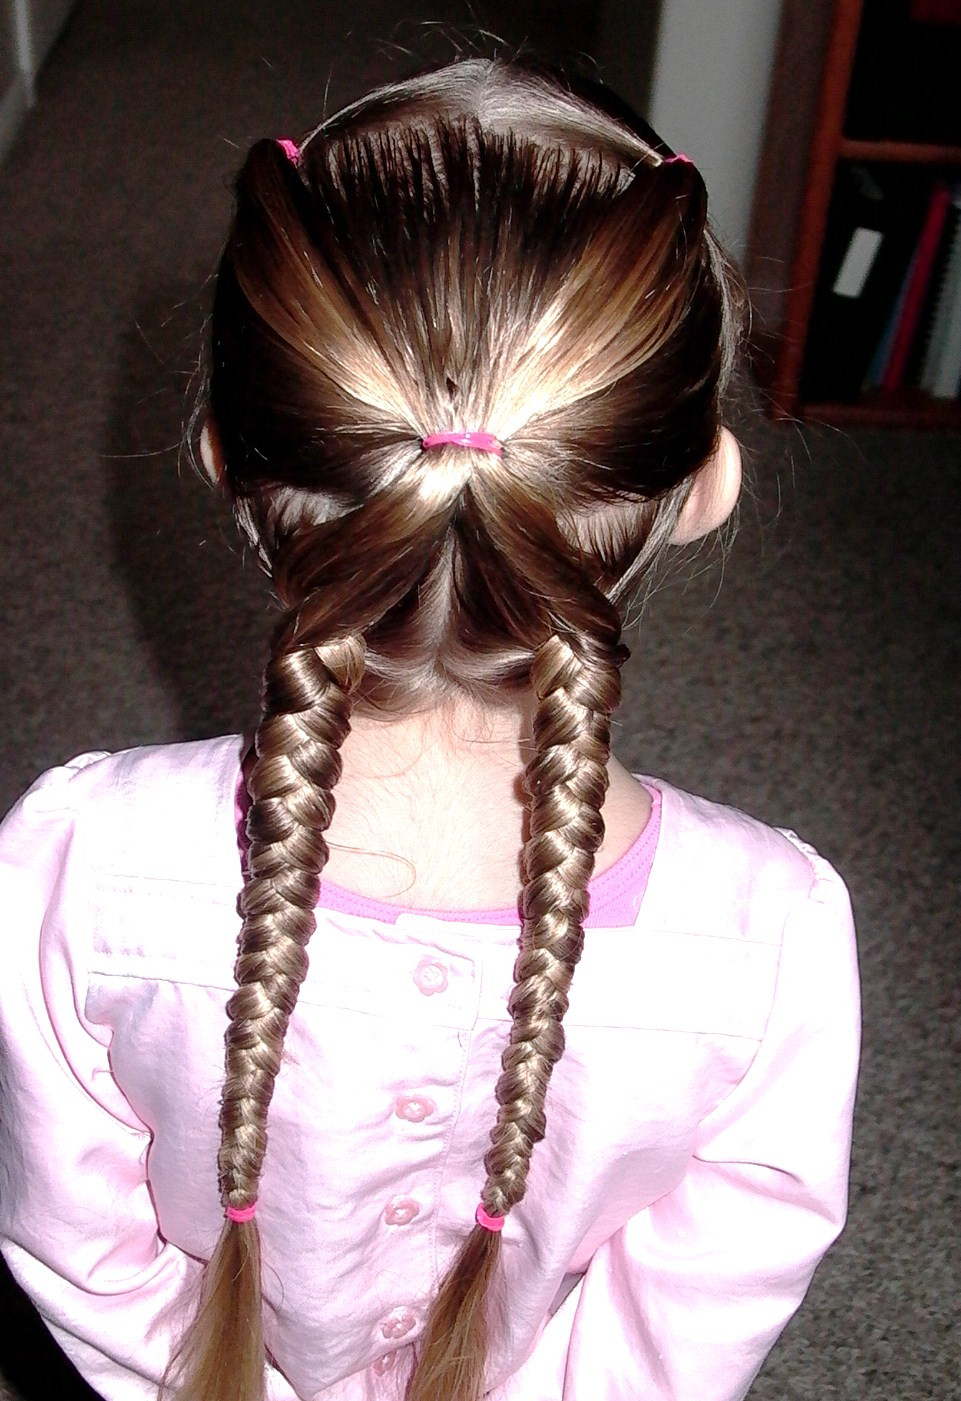 Cool Hairstyles For Little Girls
 Shaunell s Hair Little Girl s Hairstyles "X" braid